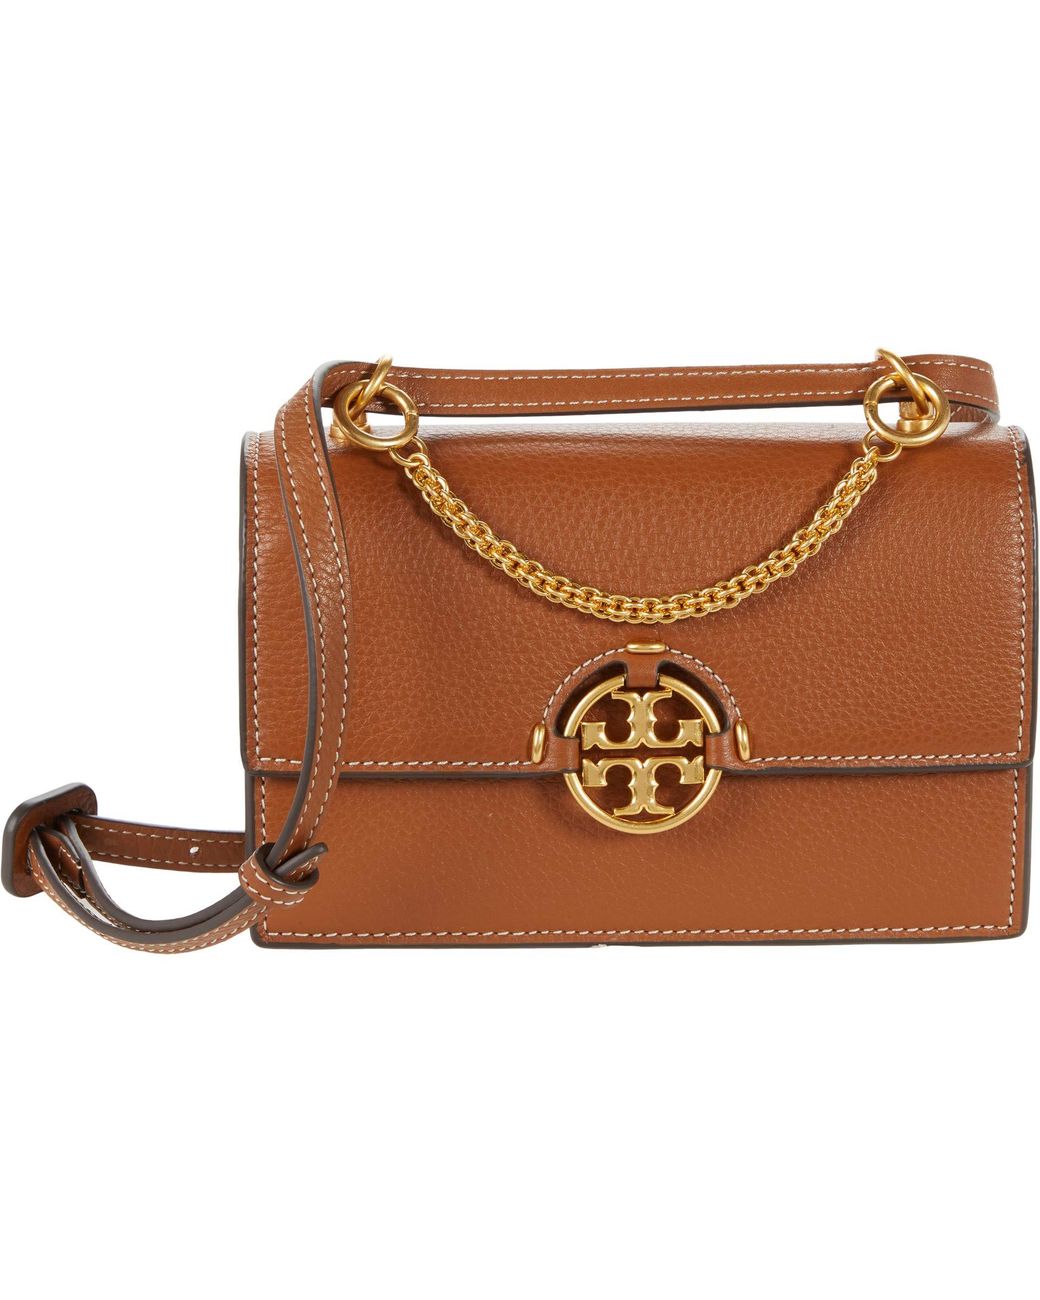 Tory Burch Leather Miller Mini Bag in Gray - Lyst